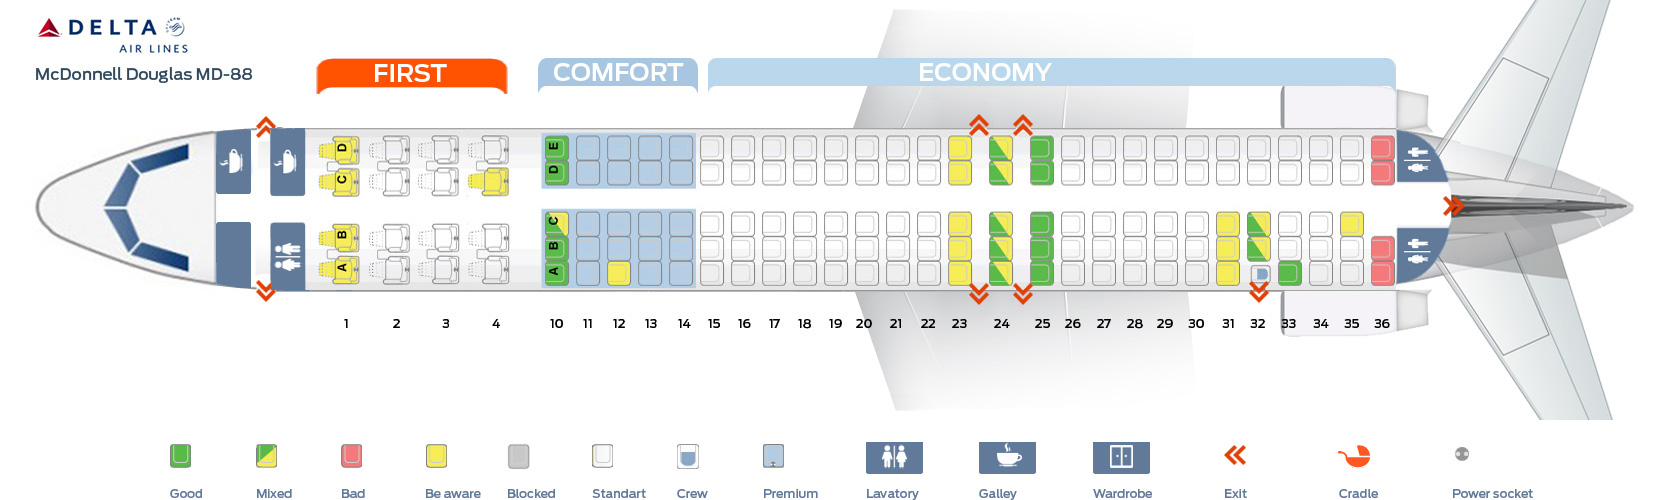 Delta Mcdonnell Douglas Md 88 Seating Chart | Elcho Table